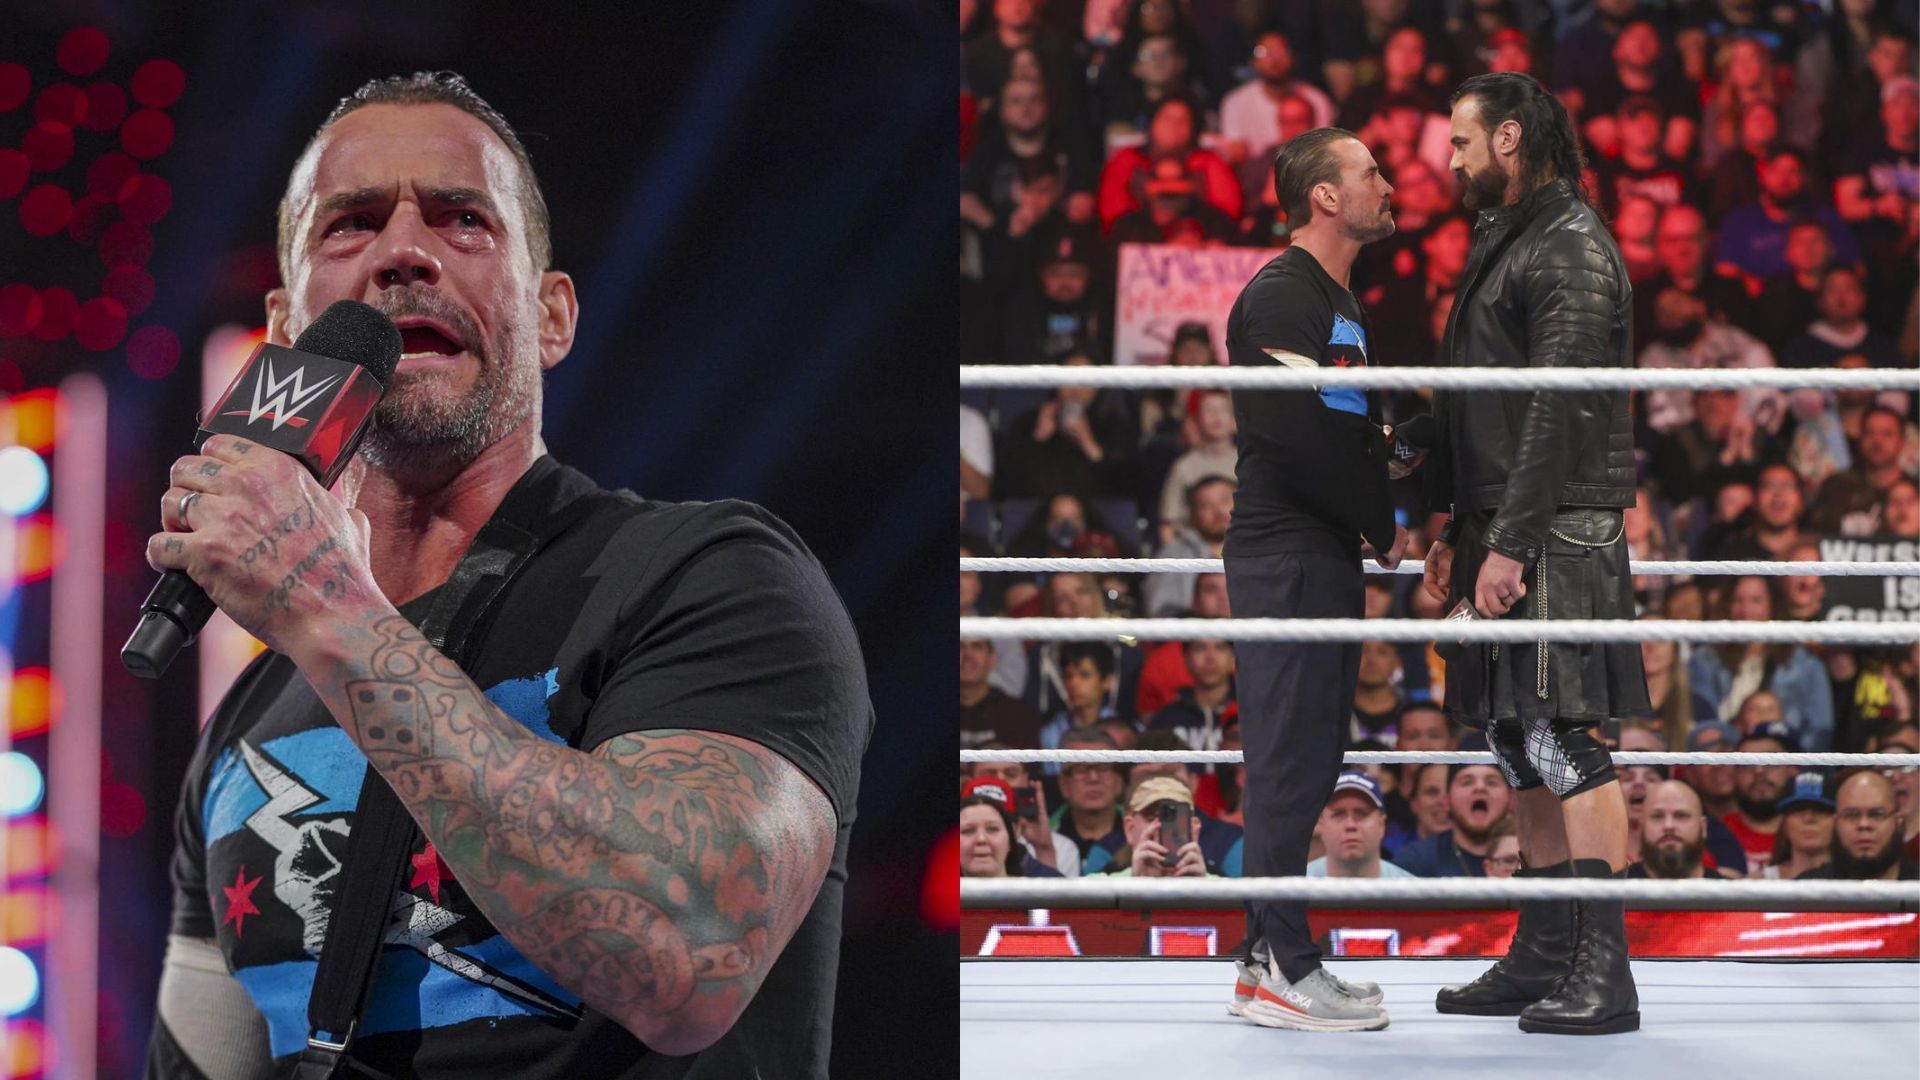 CM Punk and Drew McIntyre came face-to-face on RAW